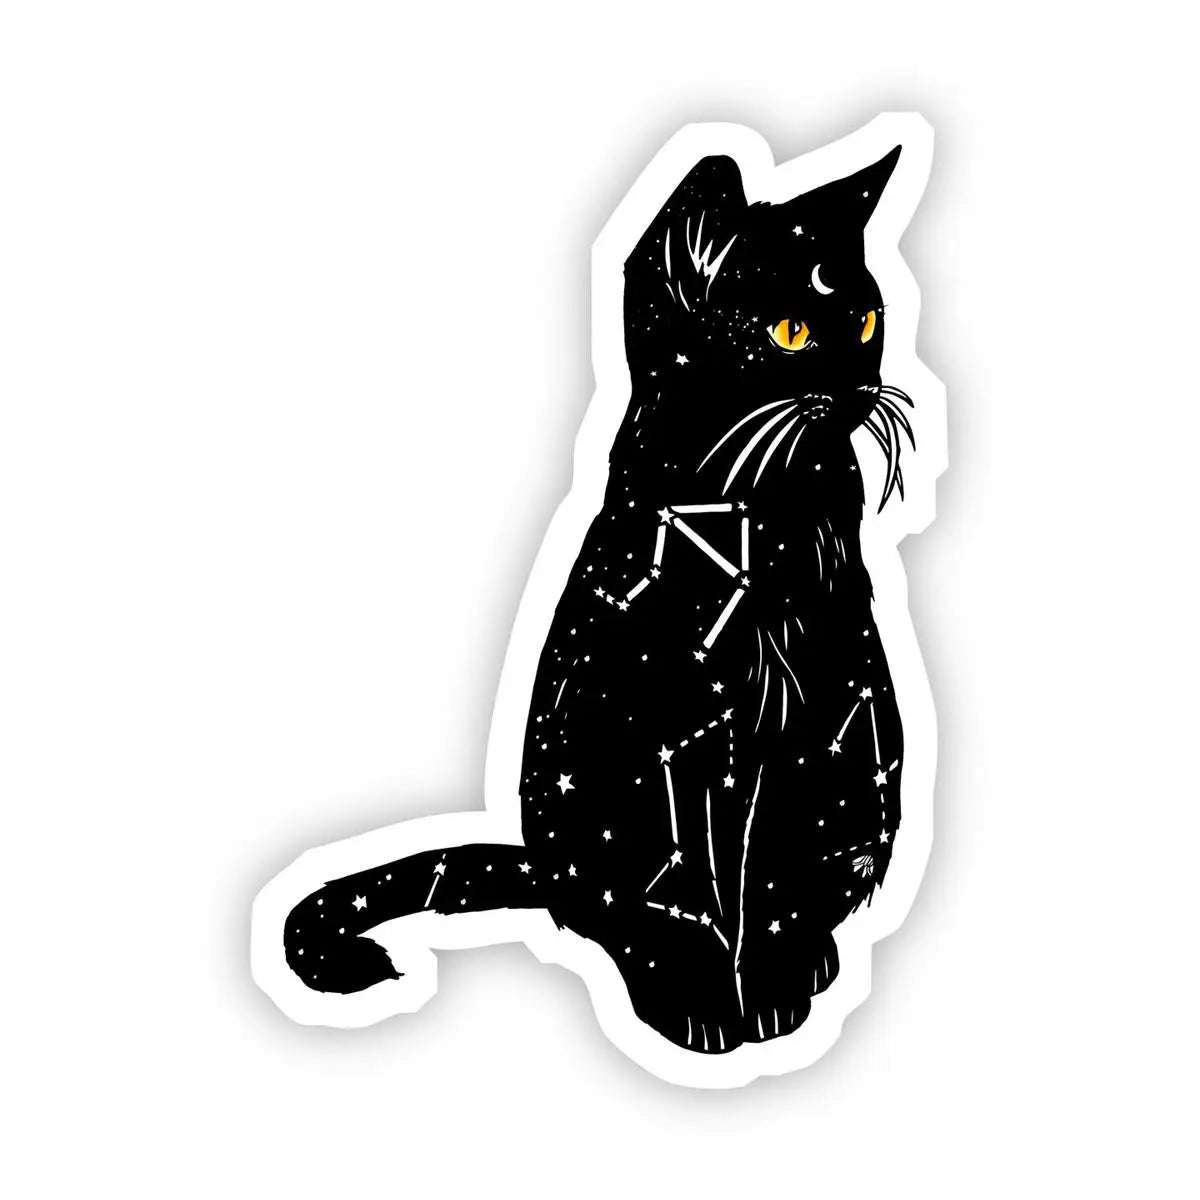 Black Cat with Yellow Eyes and Constellation Sticker - Moon Room Shop and Wellness